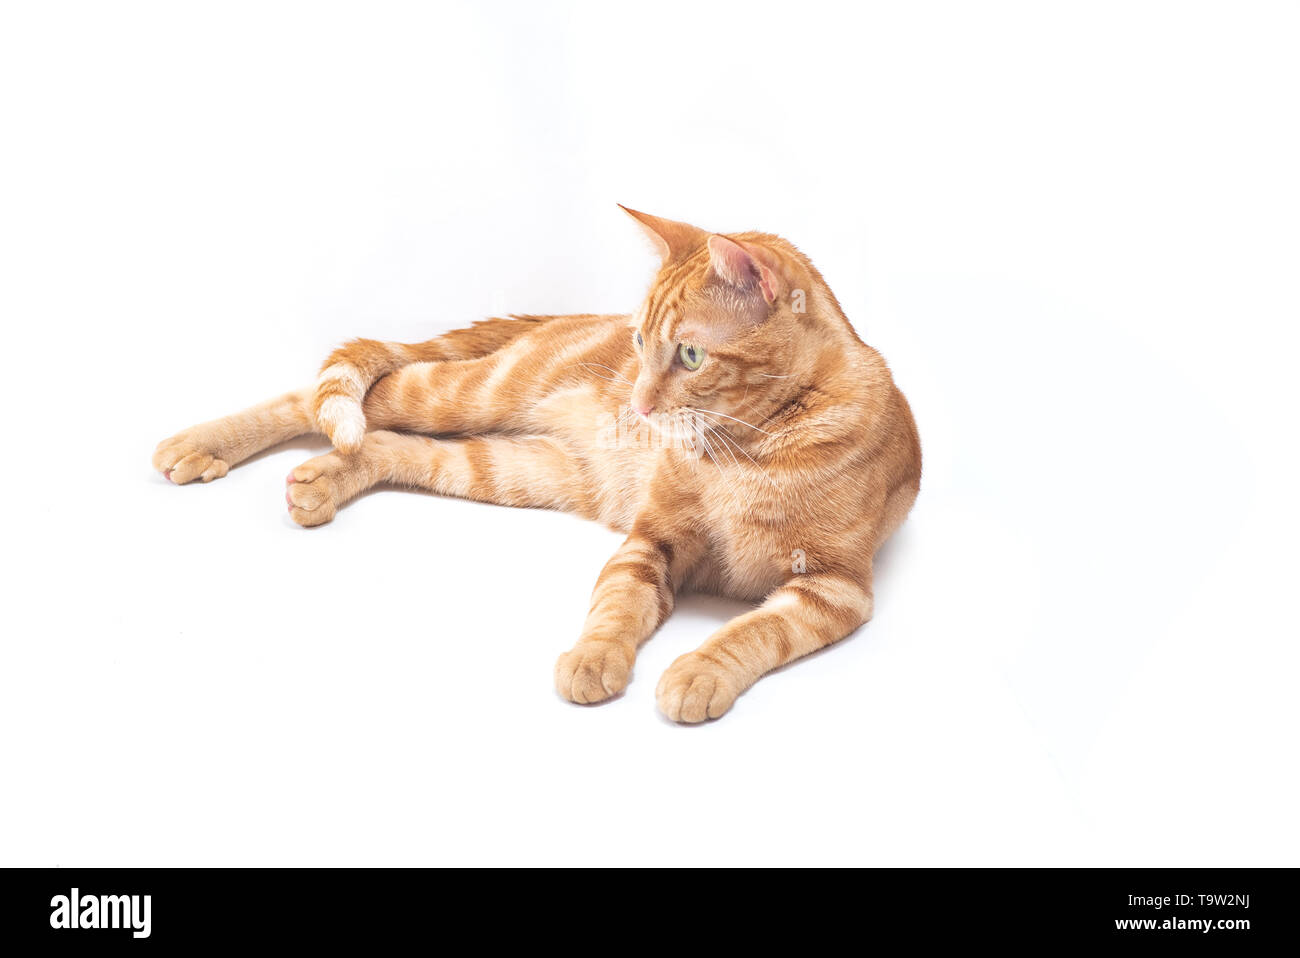 ginger red cat posing on white background Stock Photo